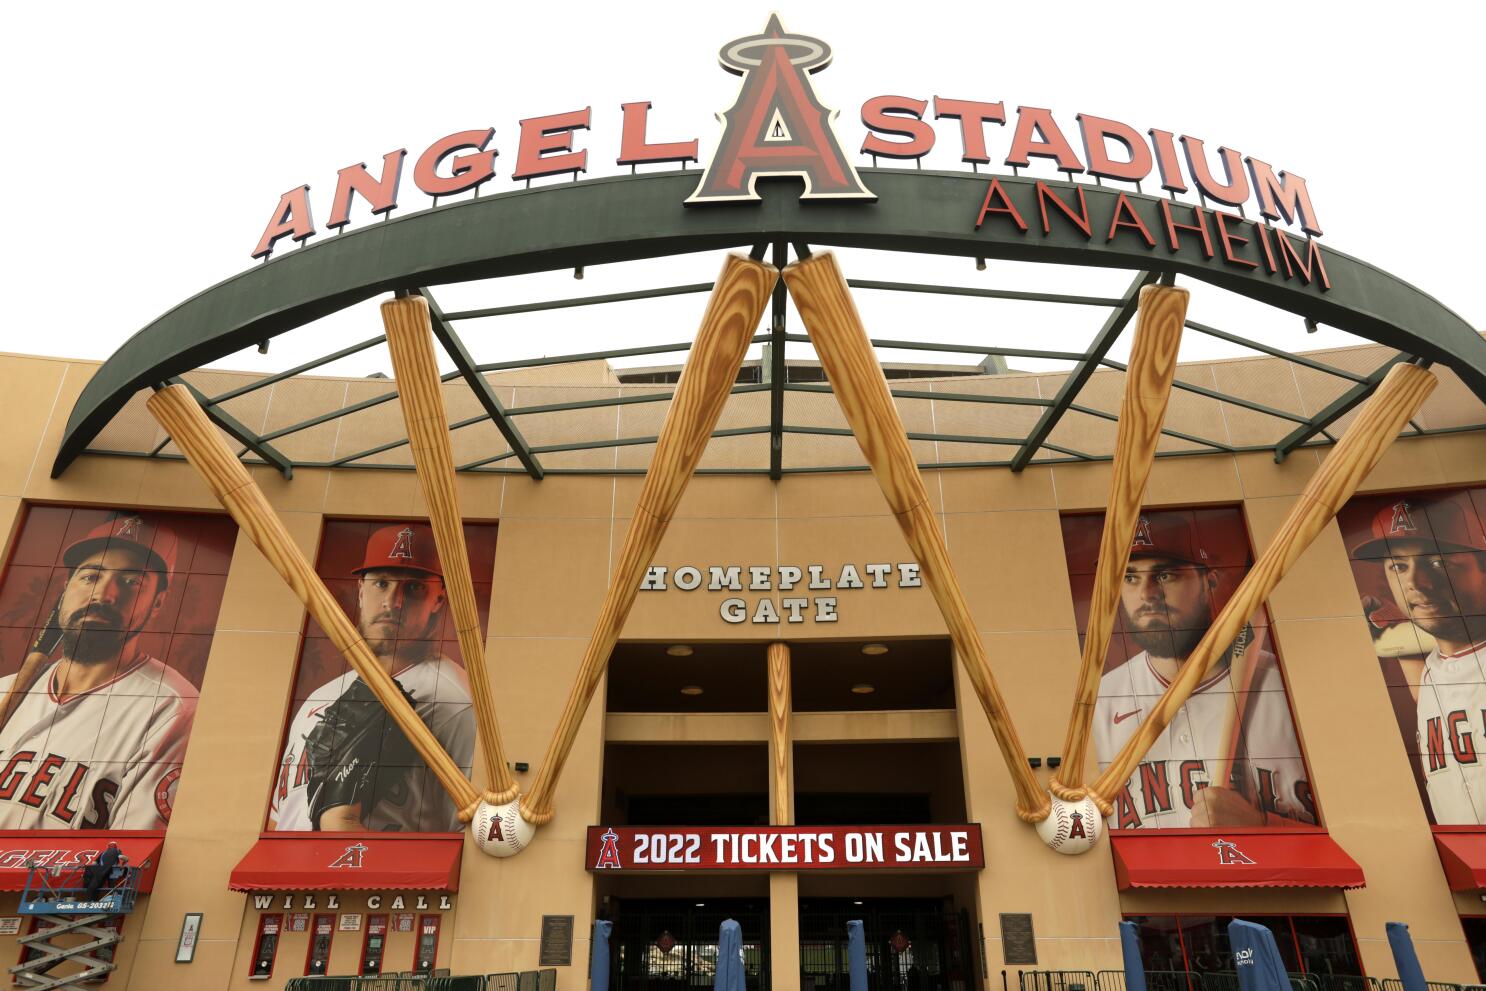 Los Angeles Angels reportedly in talks about Long Beach stadium - Curbed LA